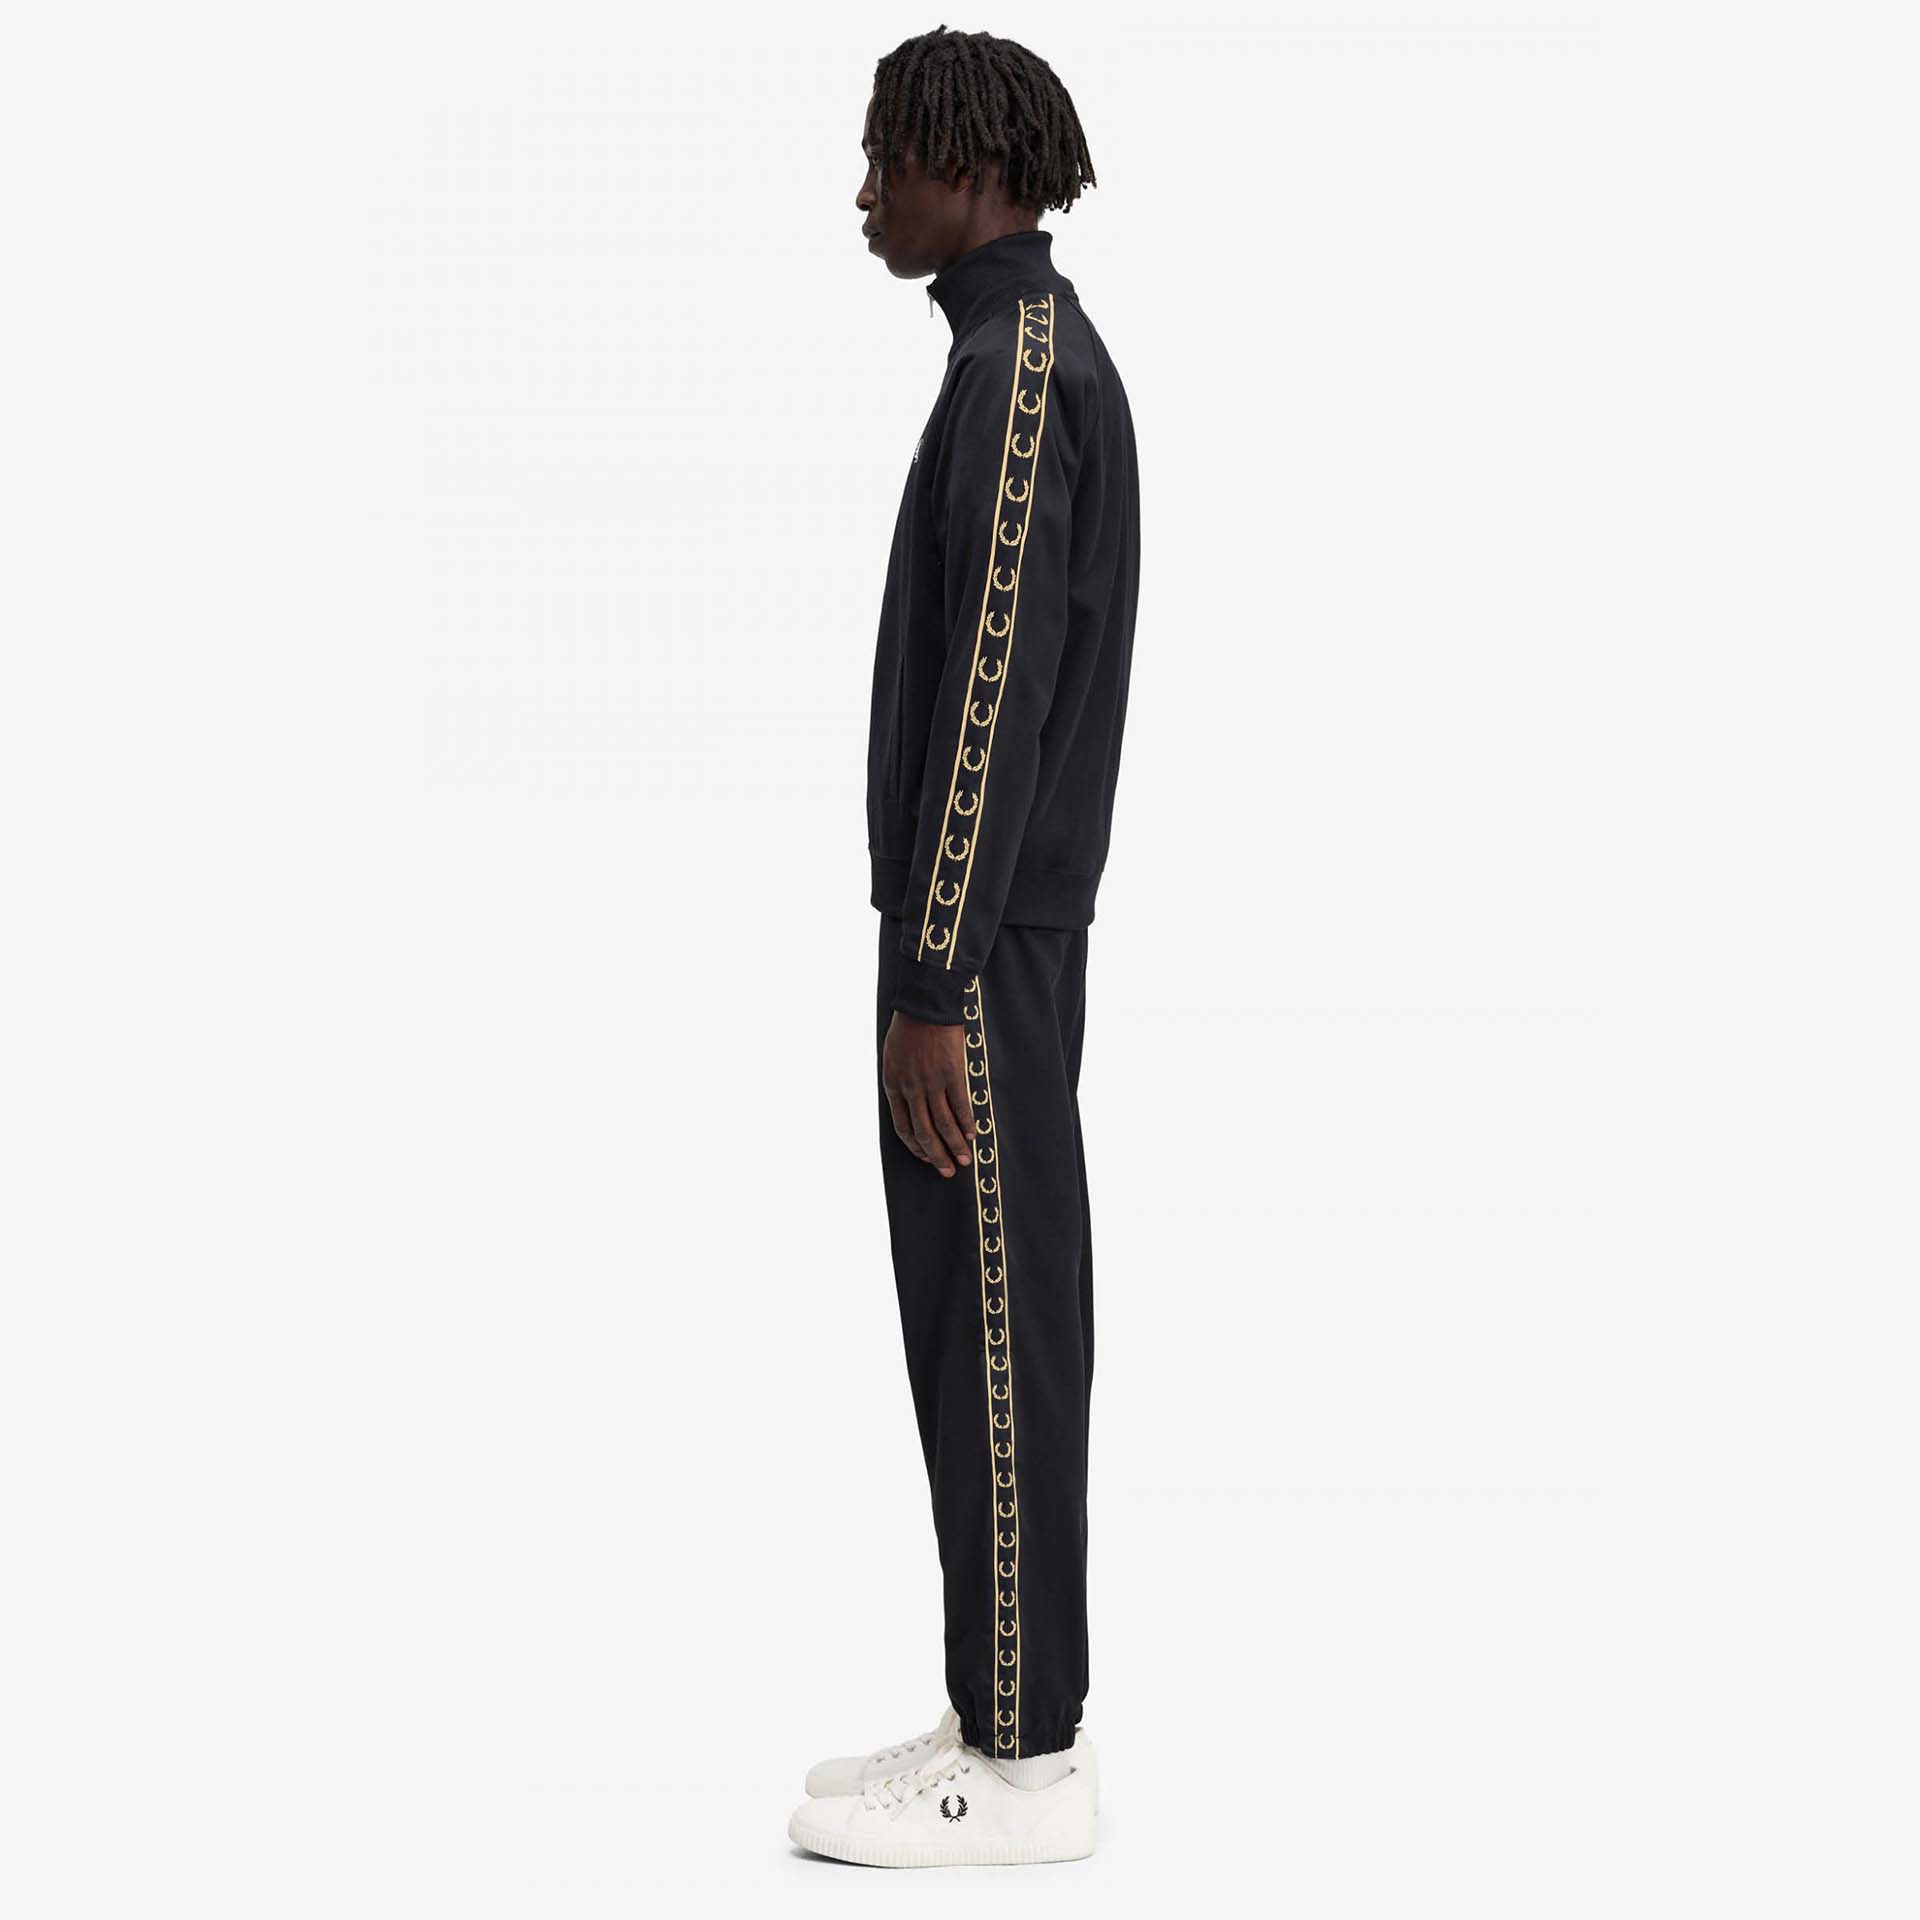 Fred Perry Seasonal Taped Track Pant Black/1964 Gold